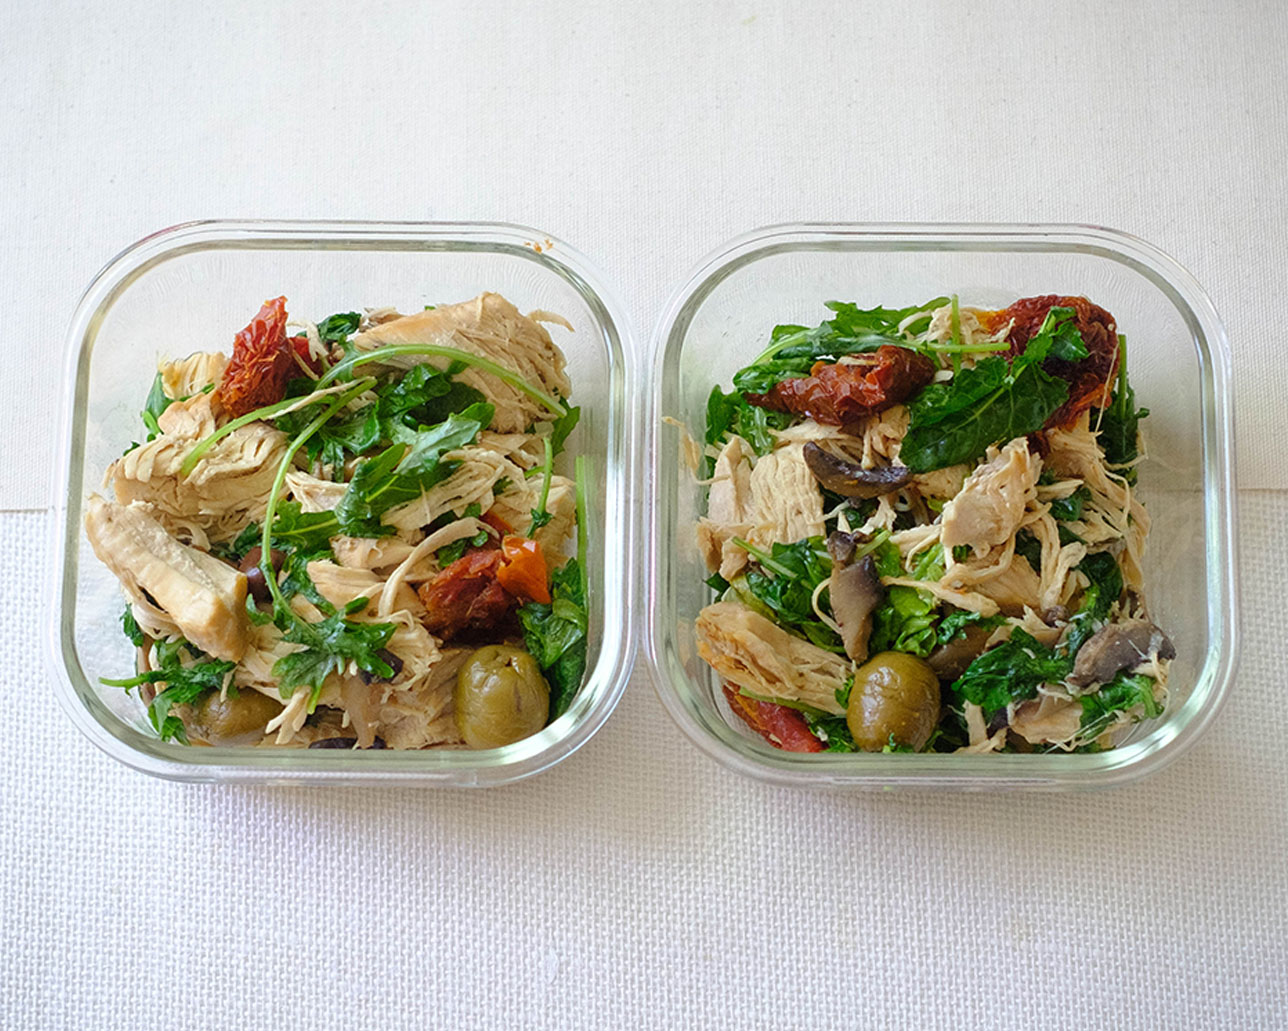 glass meal prep containers with shredded chicken, sun-dried tomato, green olives, and baby kale